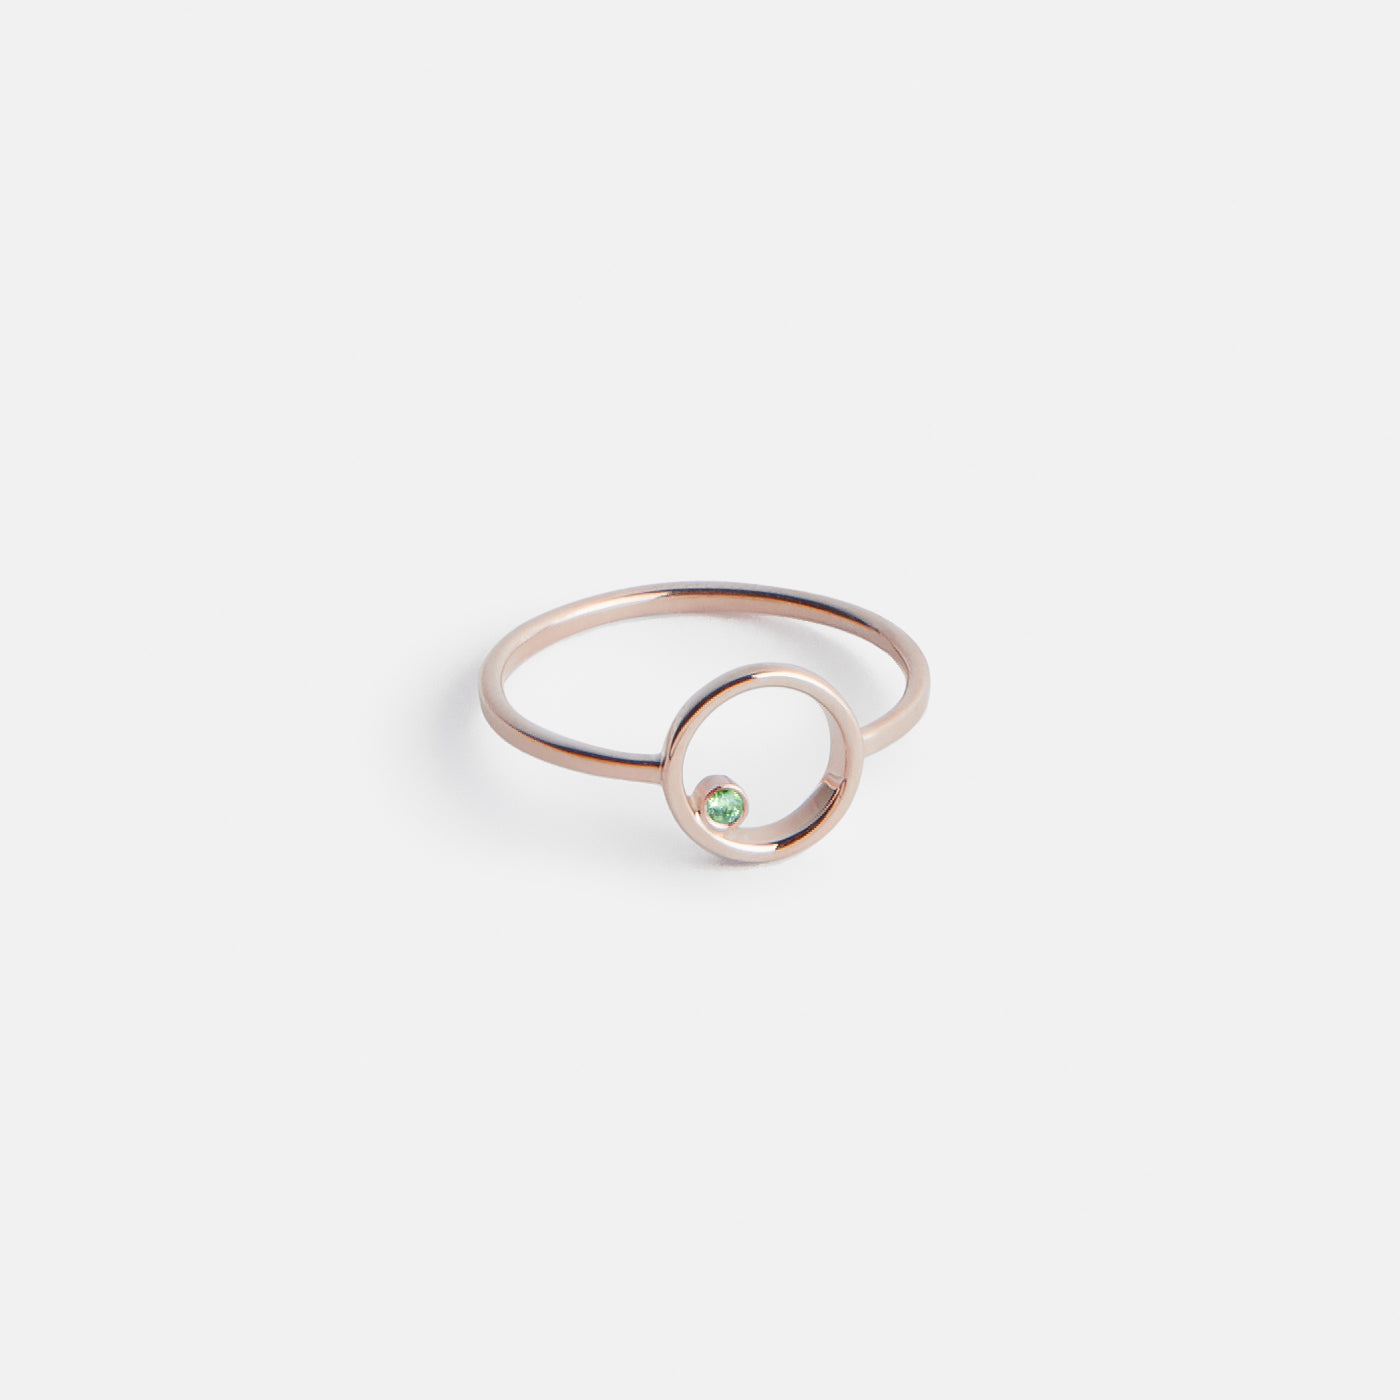 Ila Delicate Ring in 14k Rose Gold set with Green Diamond by SHW Fine Jewelry New York City